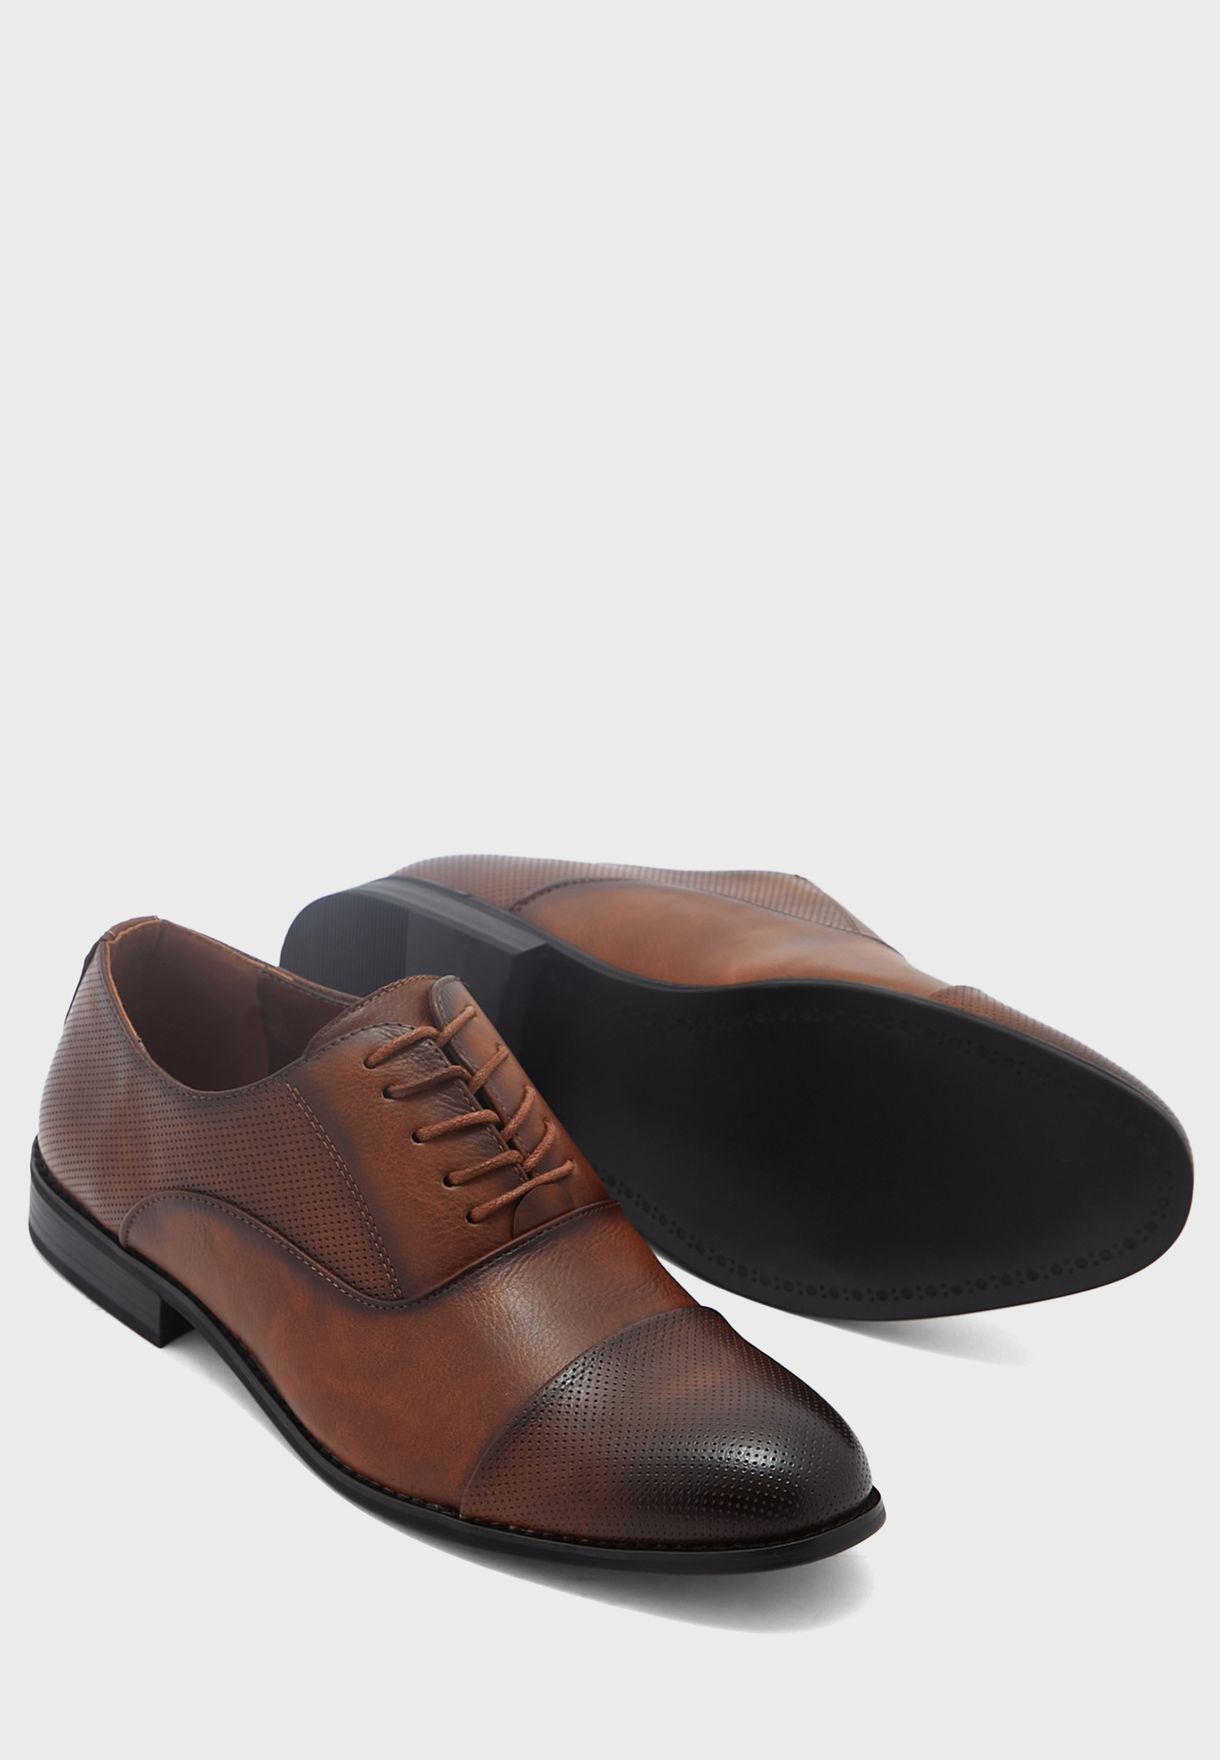 Classic Oxford Formal Lace Ups